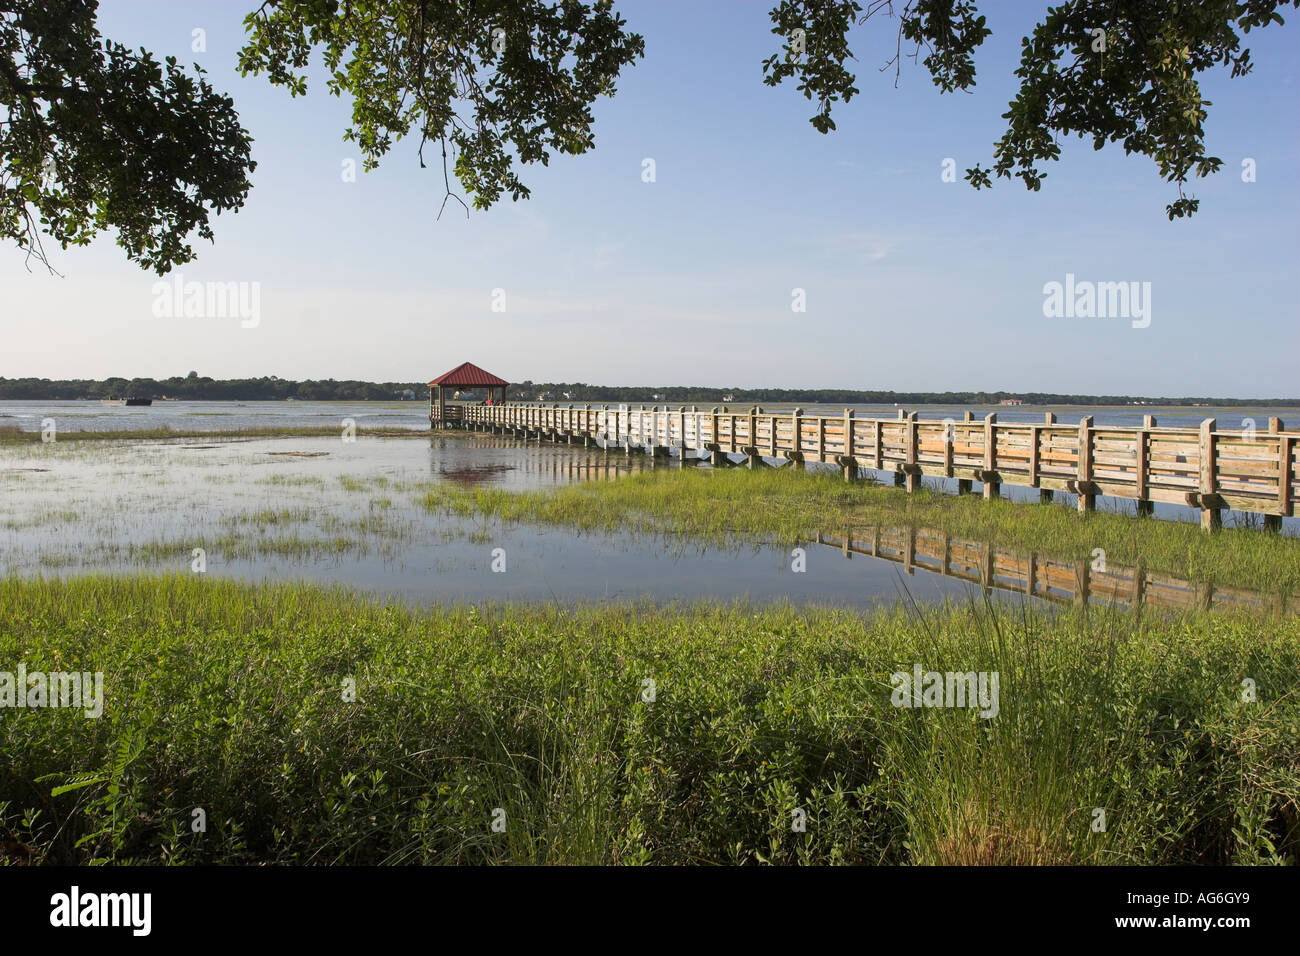 Wooden walkway out to sea at Hilton Head Island in South Carolina, USA Stock Photo